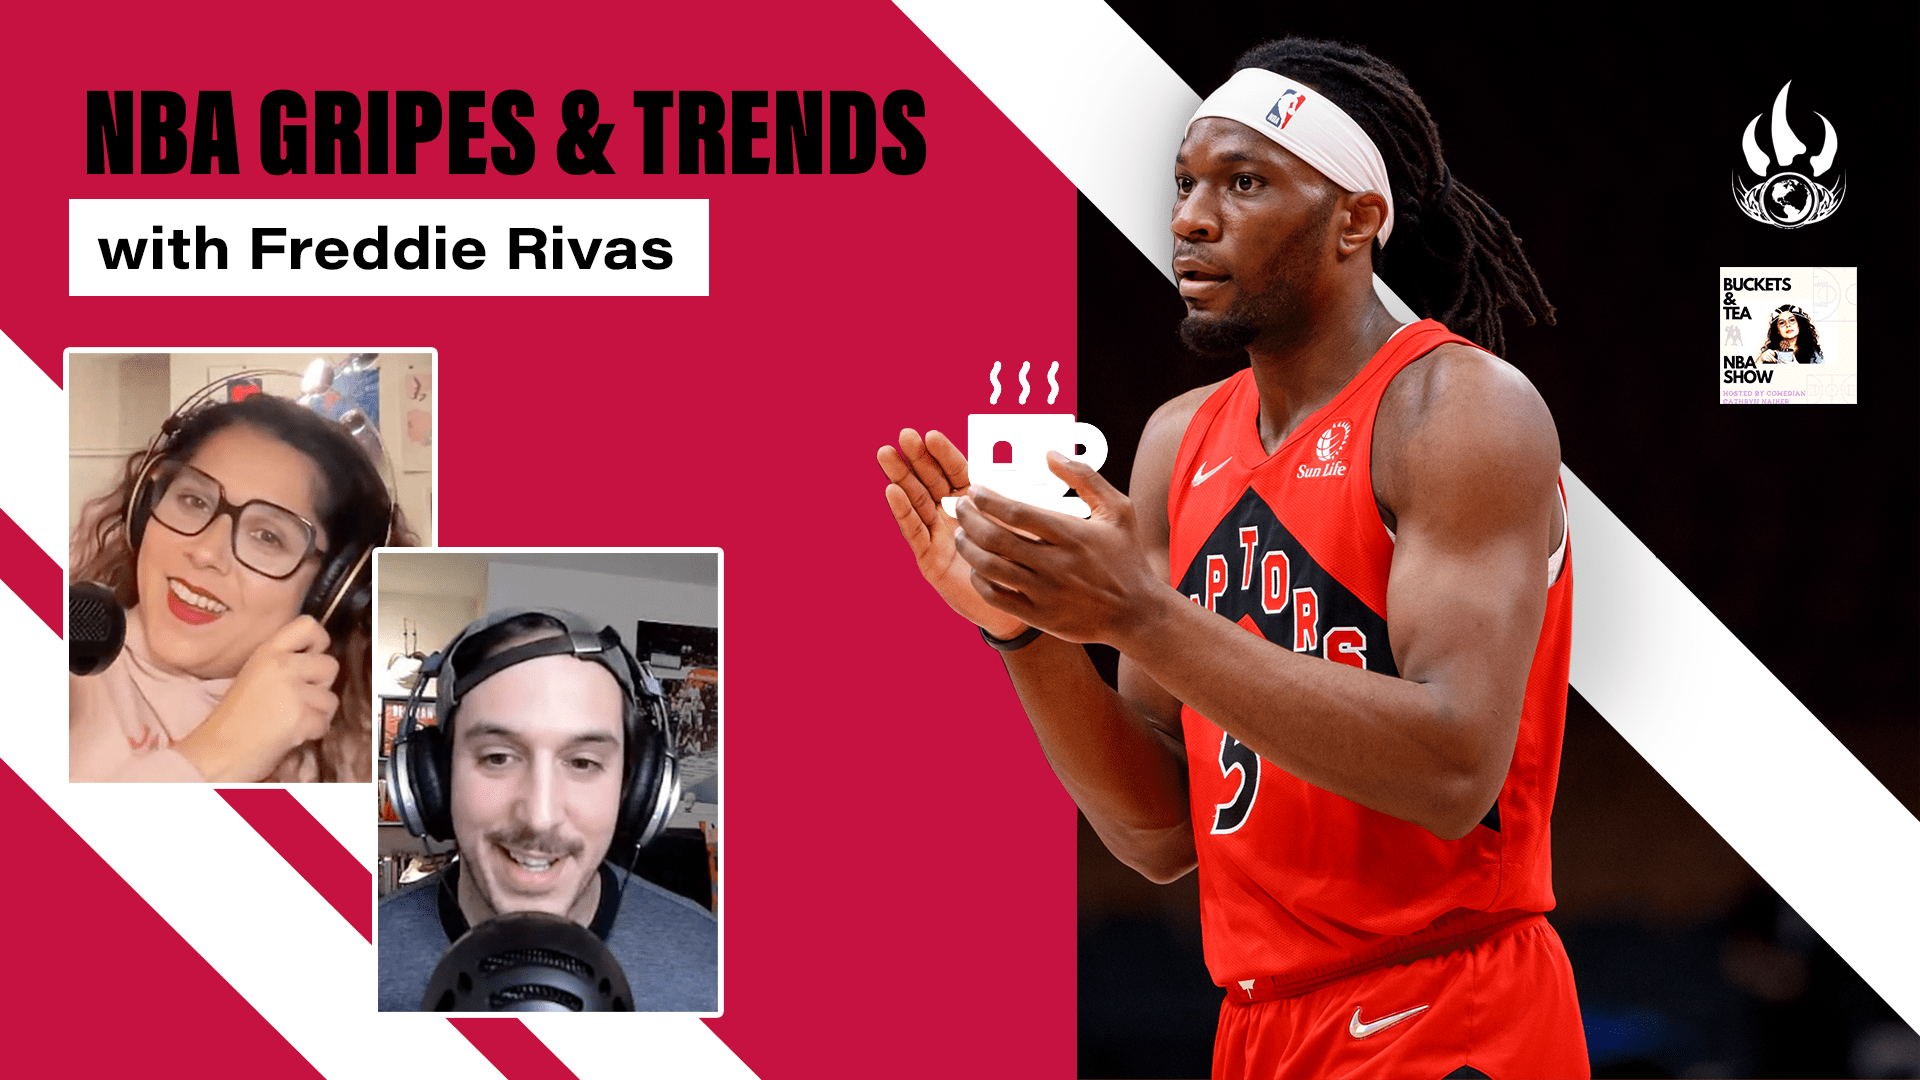 NBA Gripes and Trends with Freddie Rivas – Buckets & Tea NBA Show